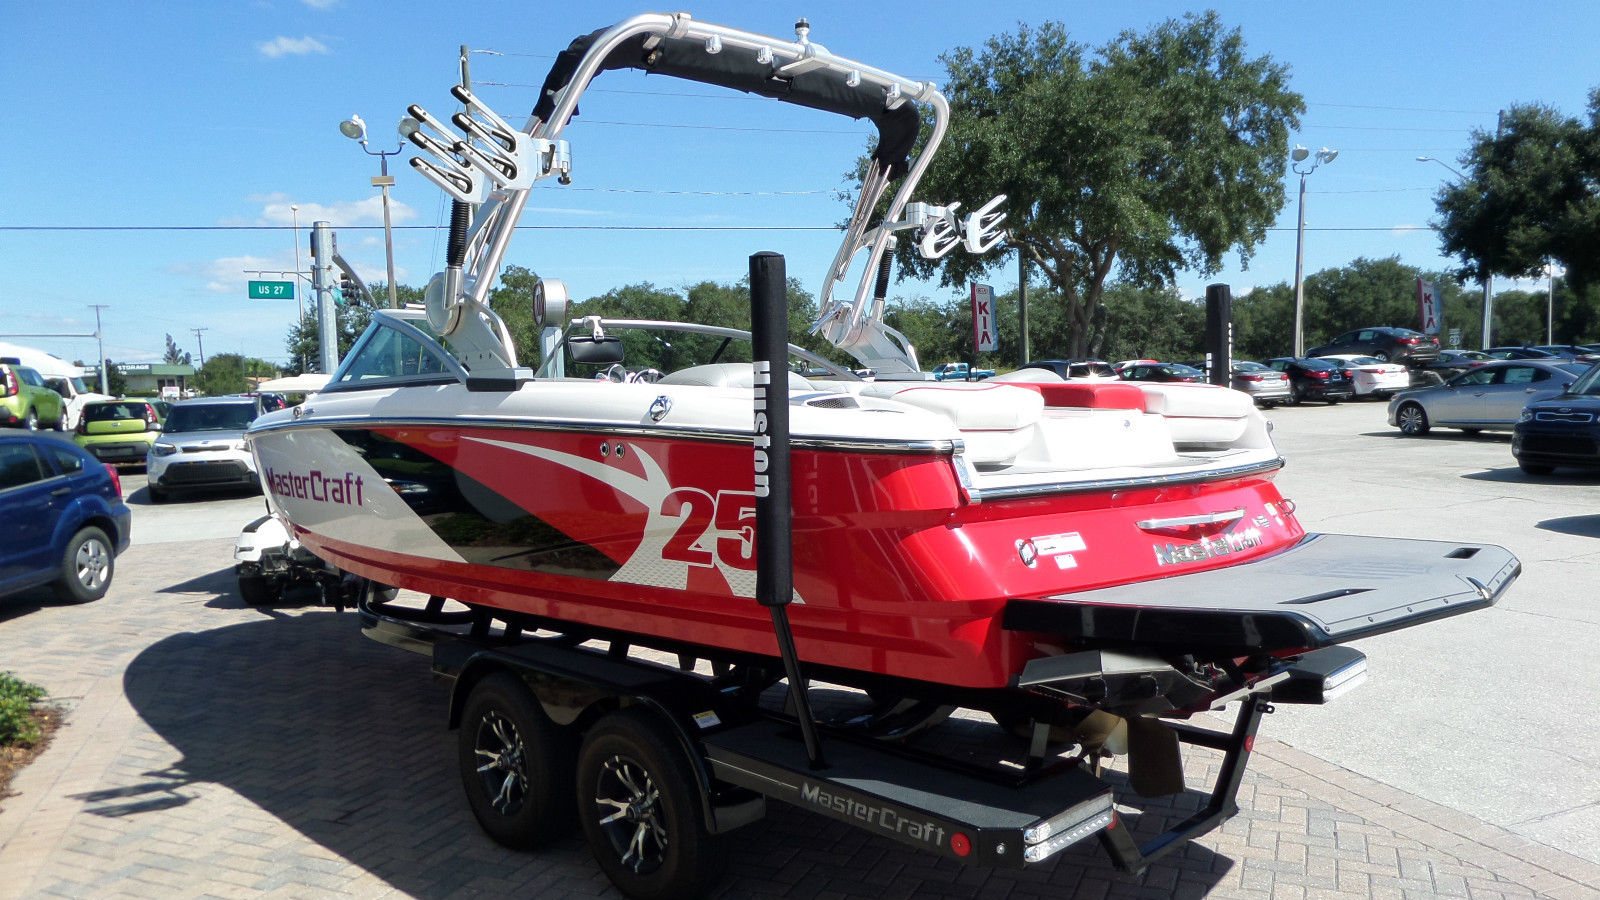 Mastercraft X25 Brand New Boat Pro Package And Gen2 Surf! 2013 for sale